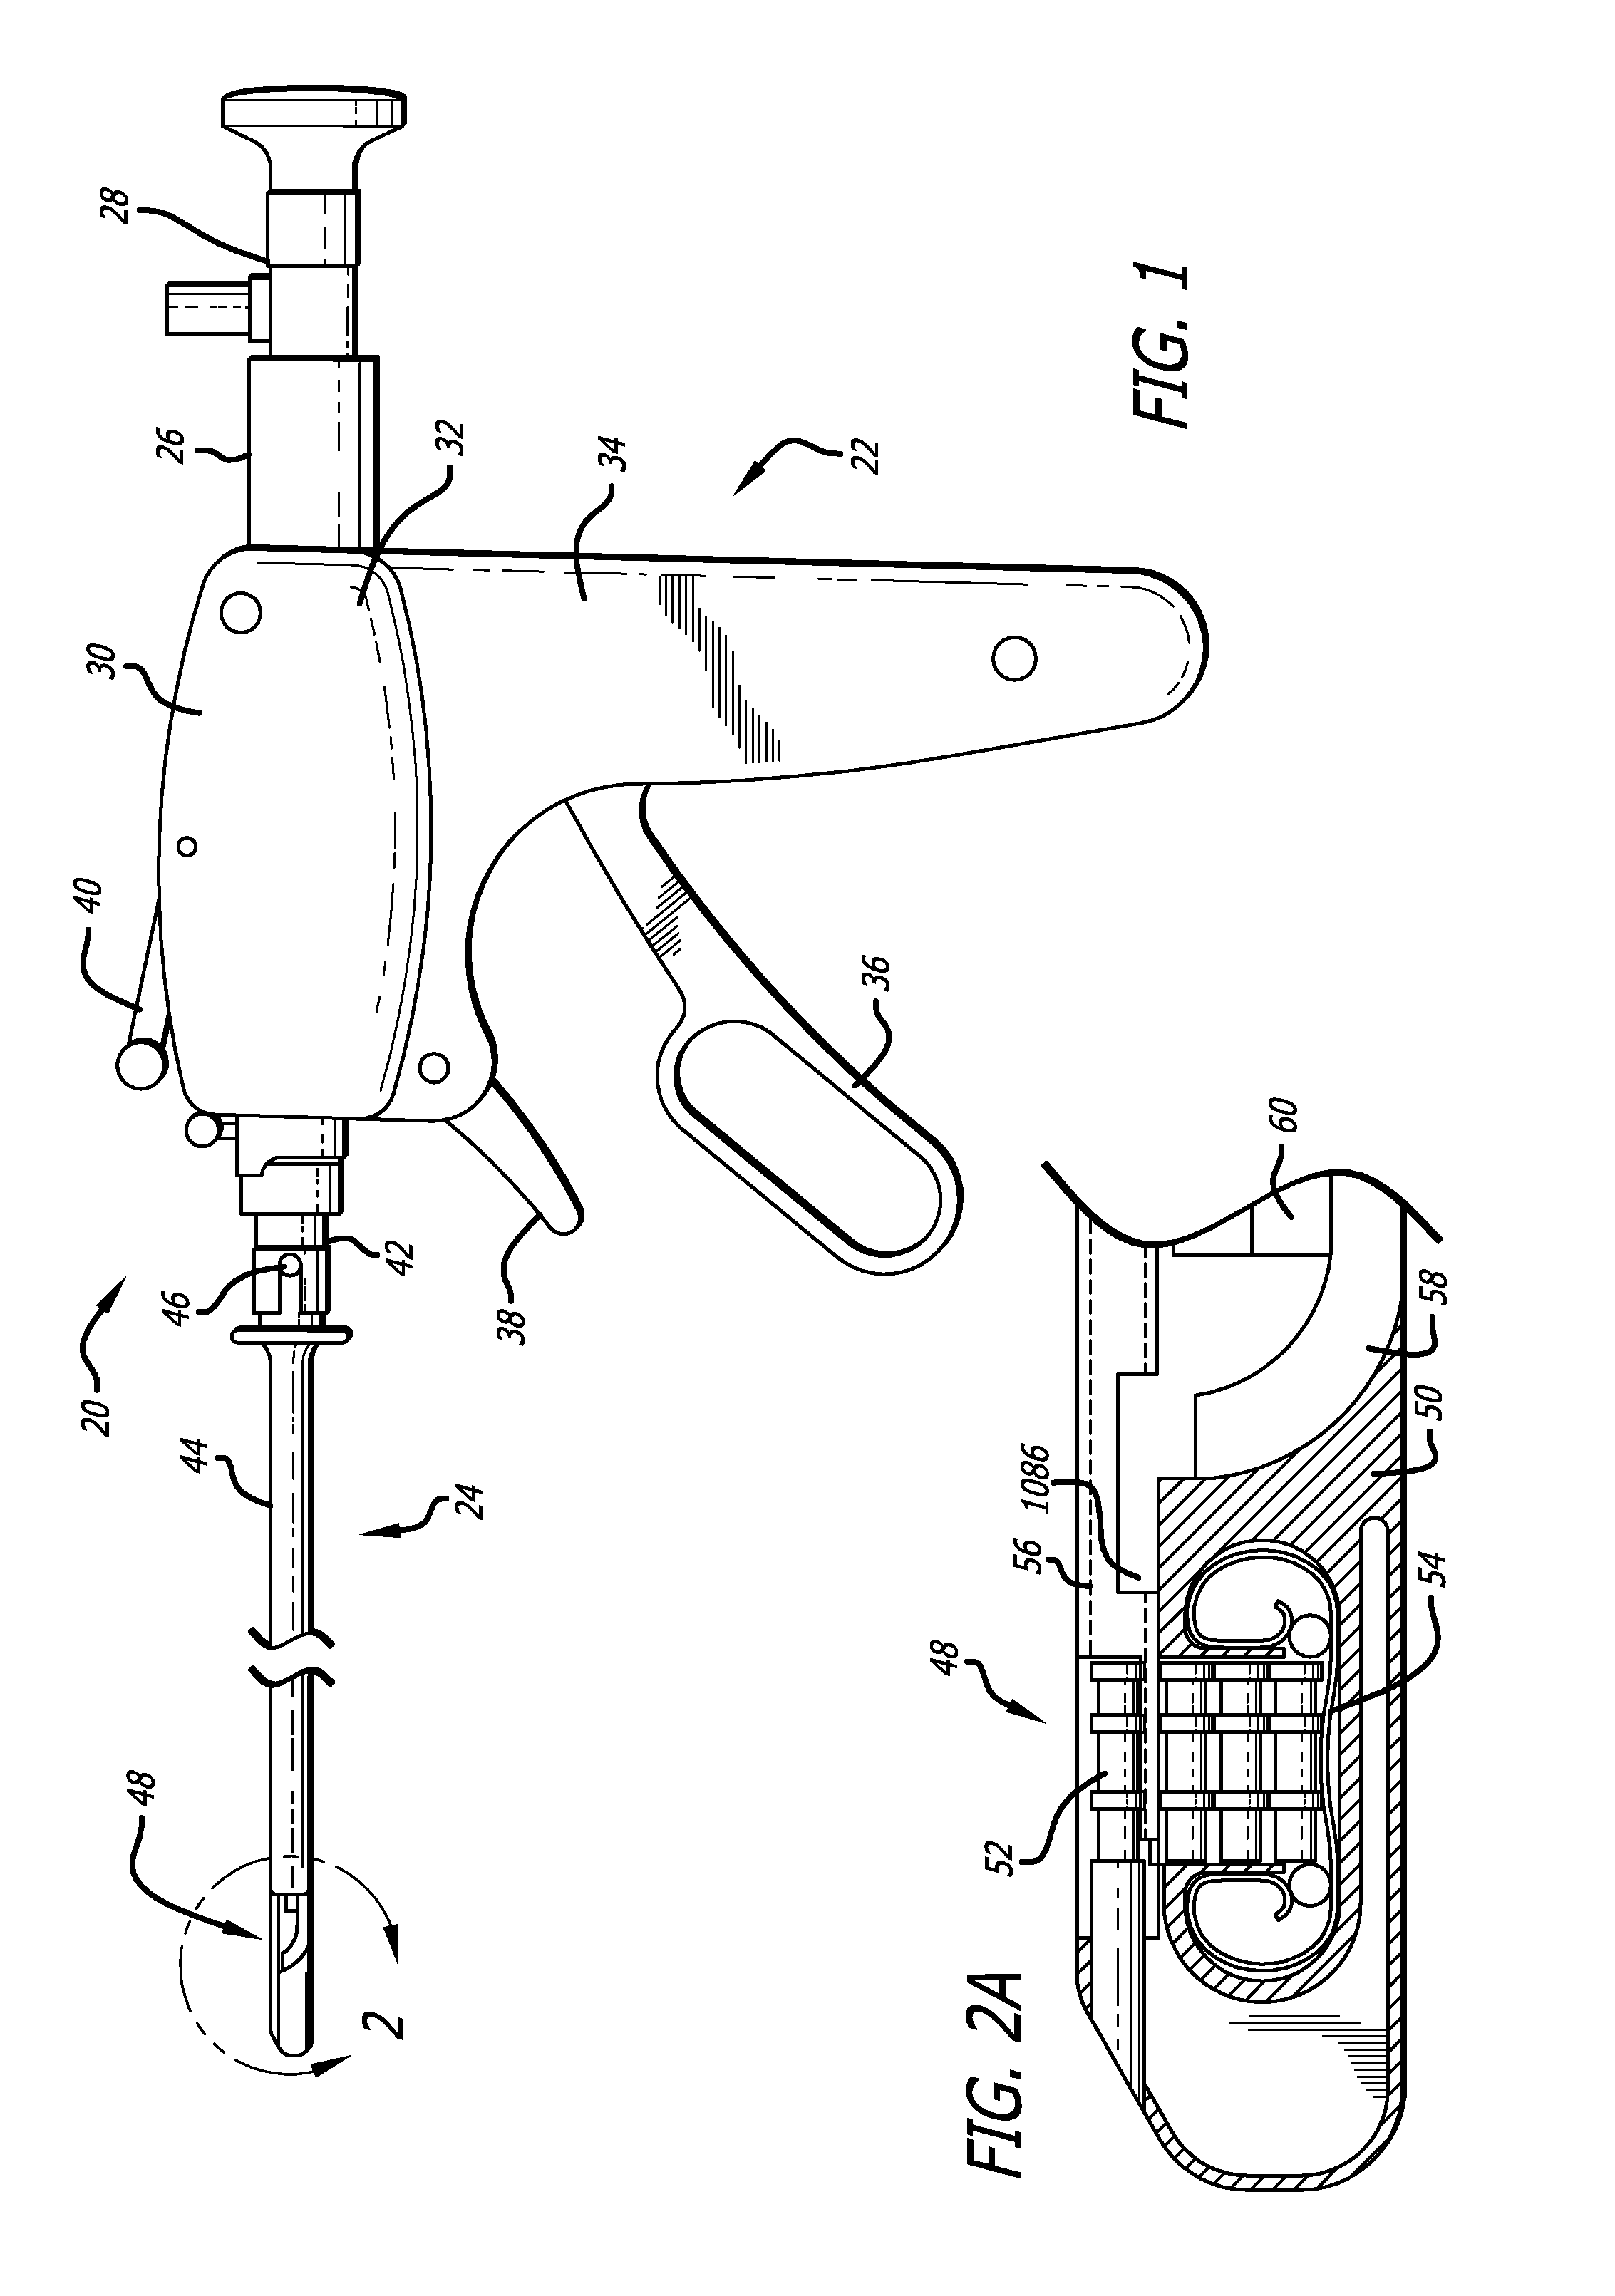 Integrated handle assembly for anchor delivery system